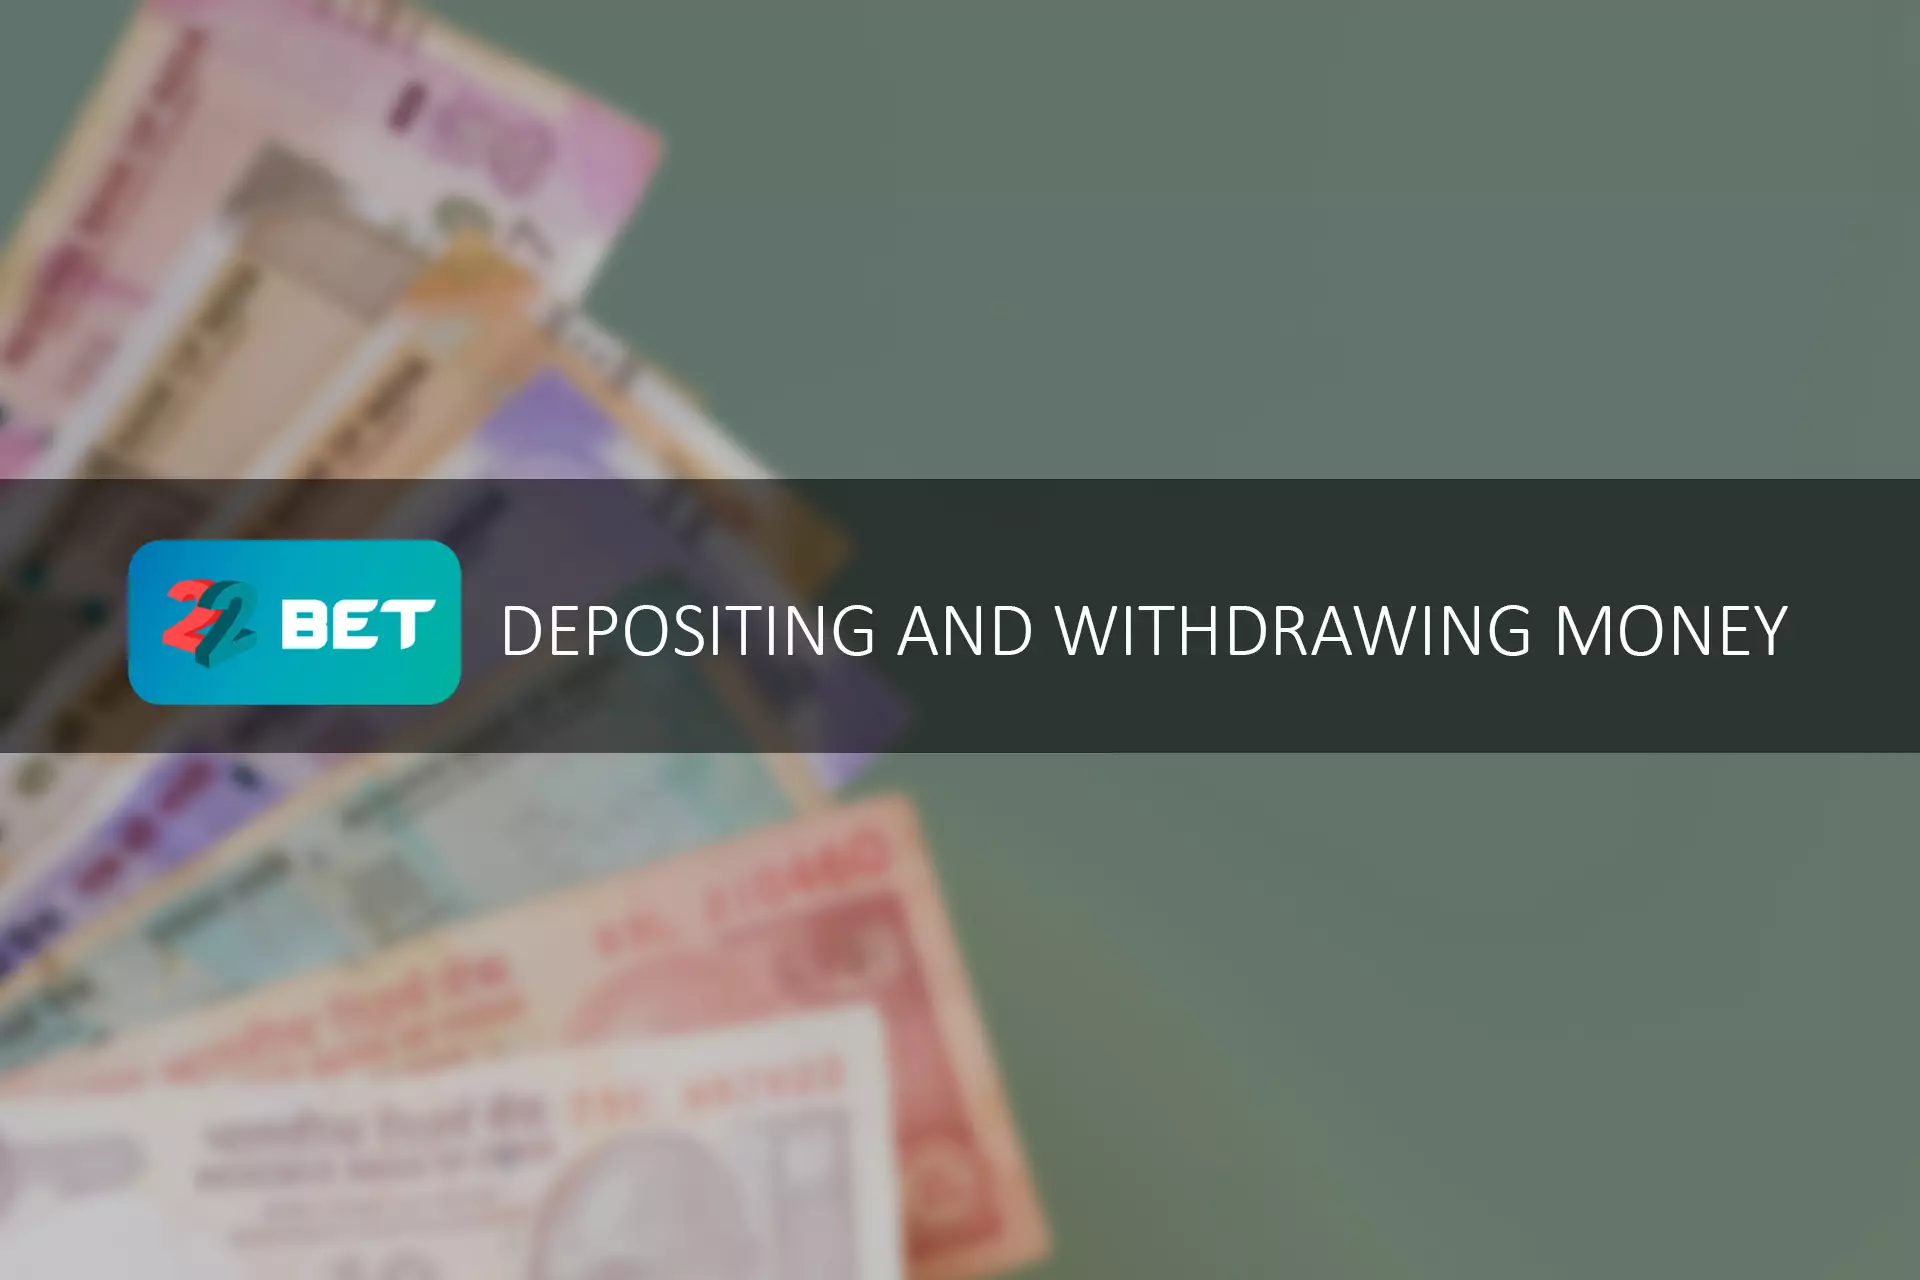 You can deposit using either bank cards or e-wallets.